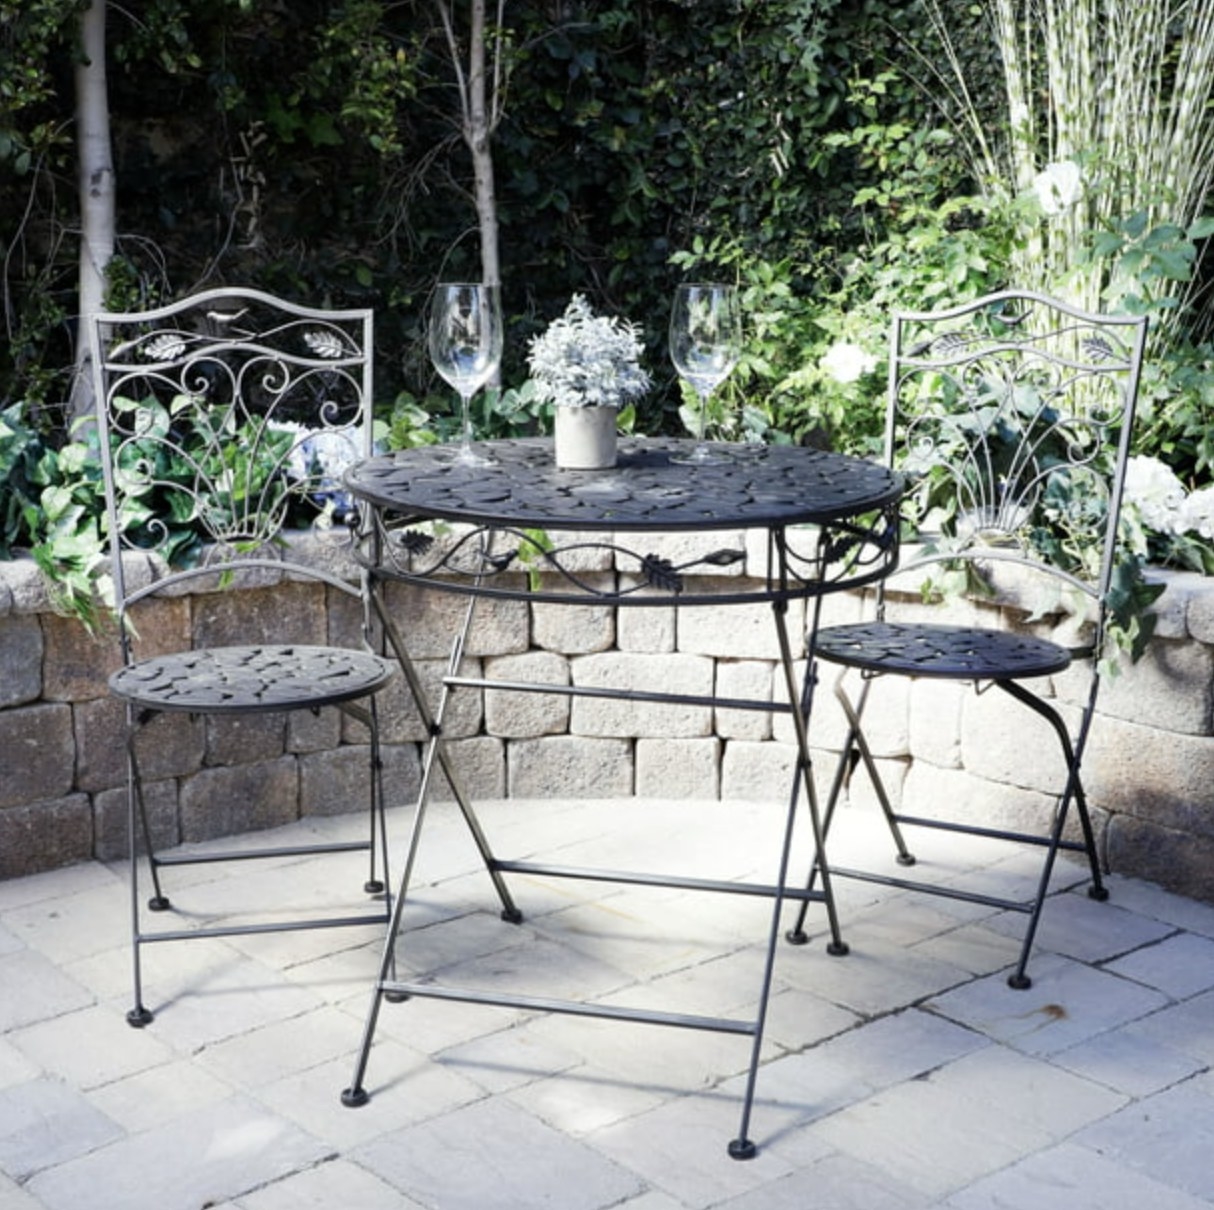 the black metal folding chairs and table in a decorated patio space